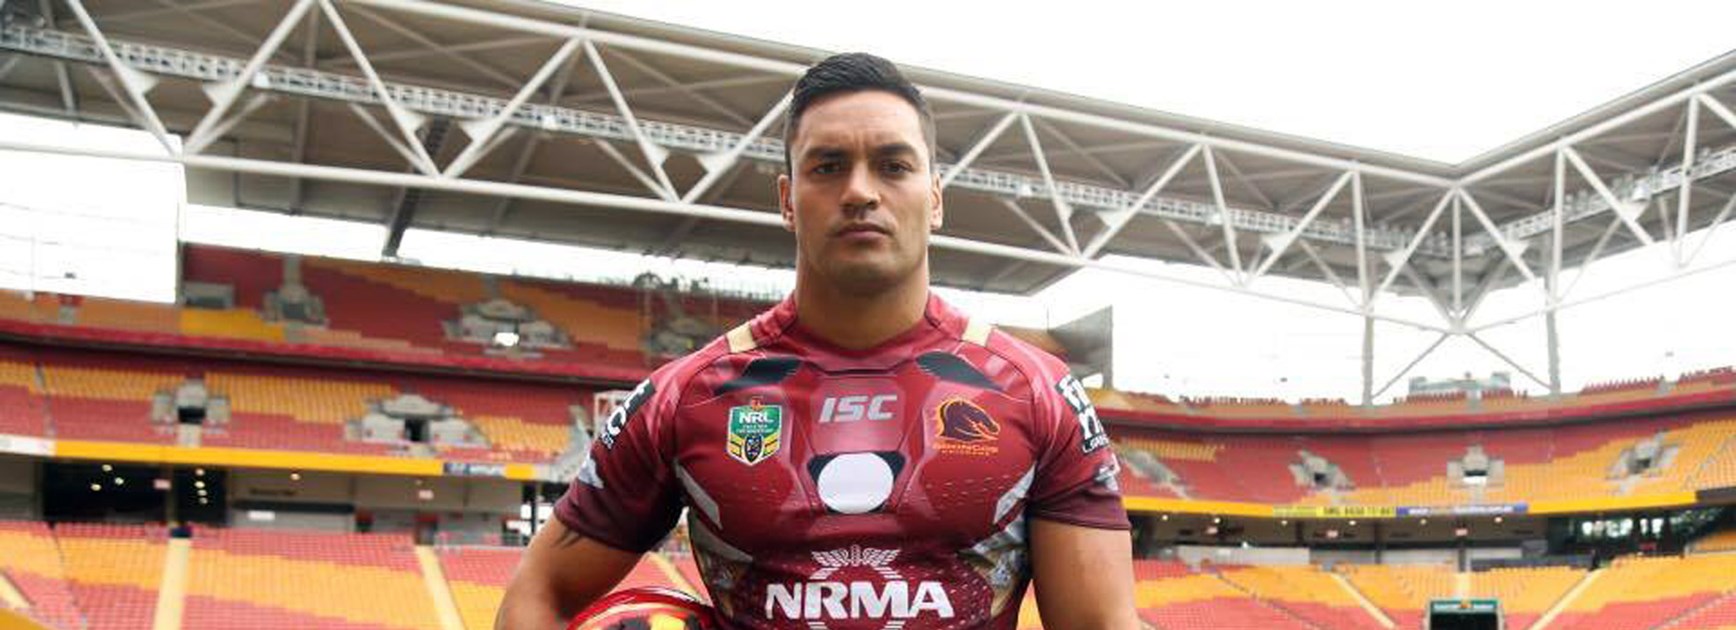 Alex Glenn in the Broncos' Ironman jersey for Round 4.